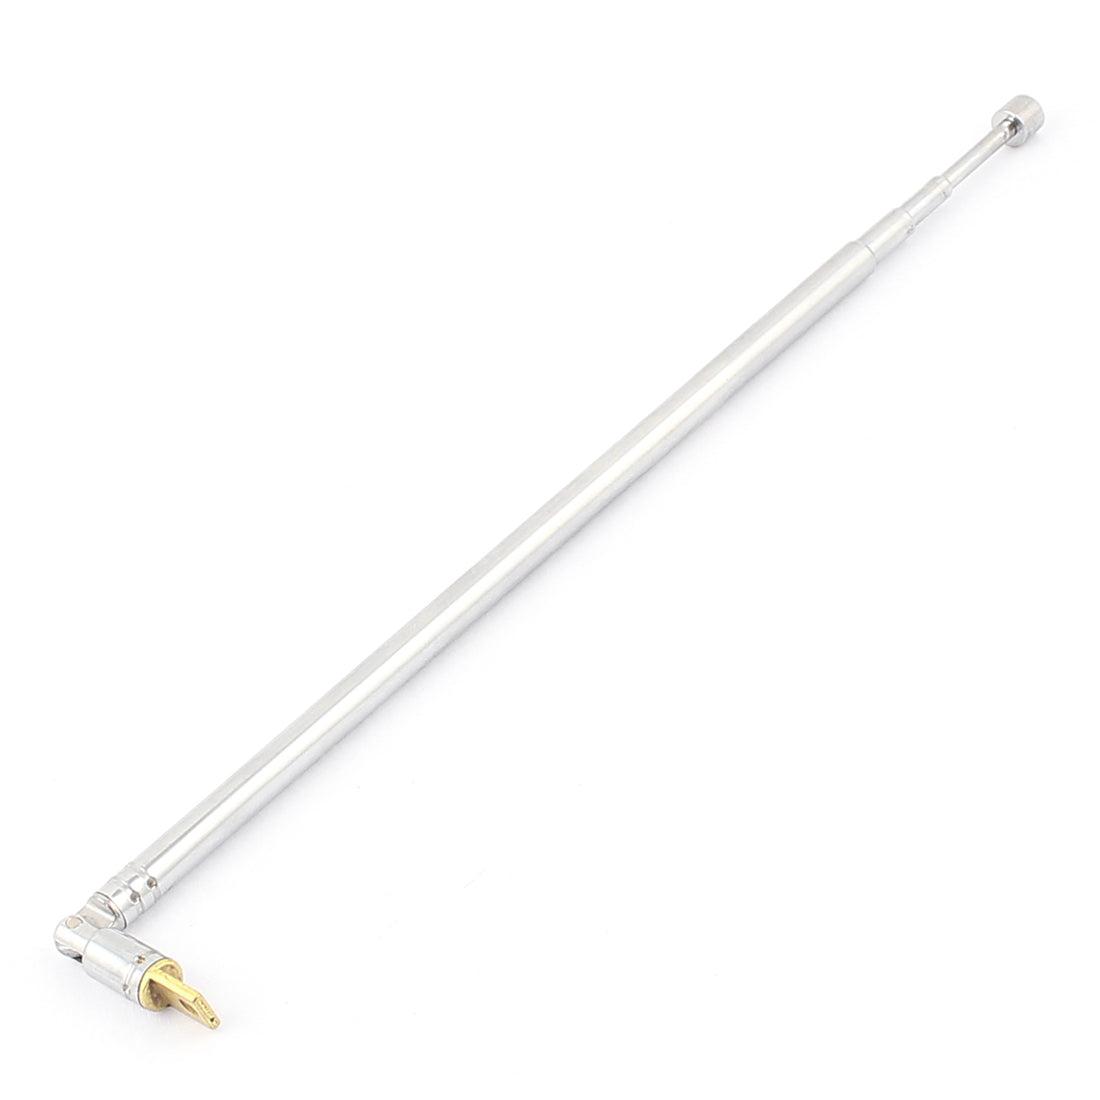 uxcell Uxcell 62.5cm 4 Section Stainless Steel AM FM Radio Universal Telescopic Antenna